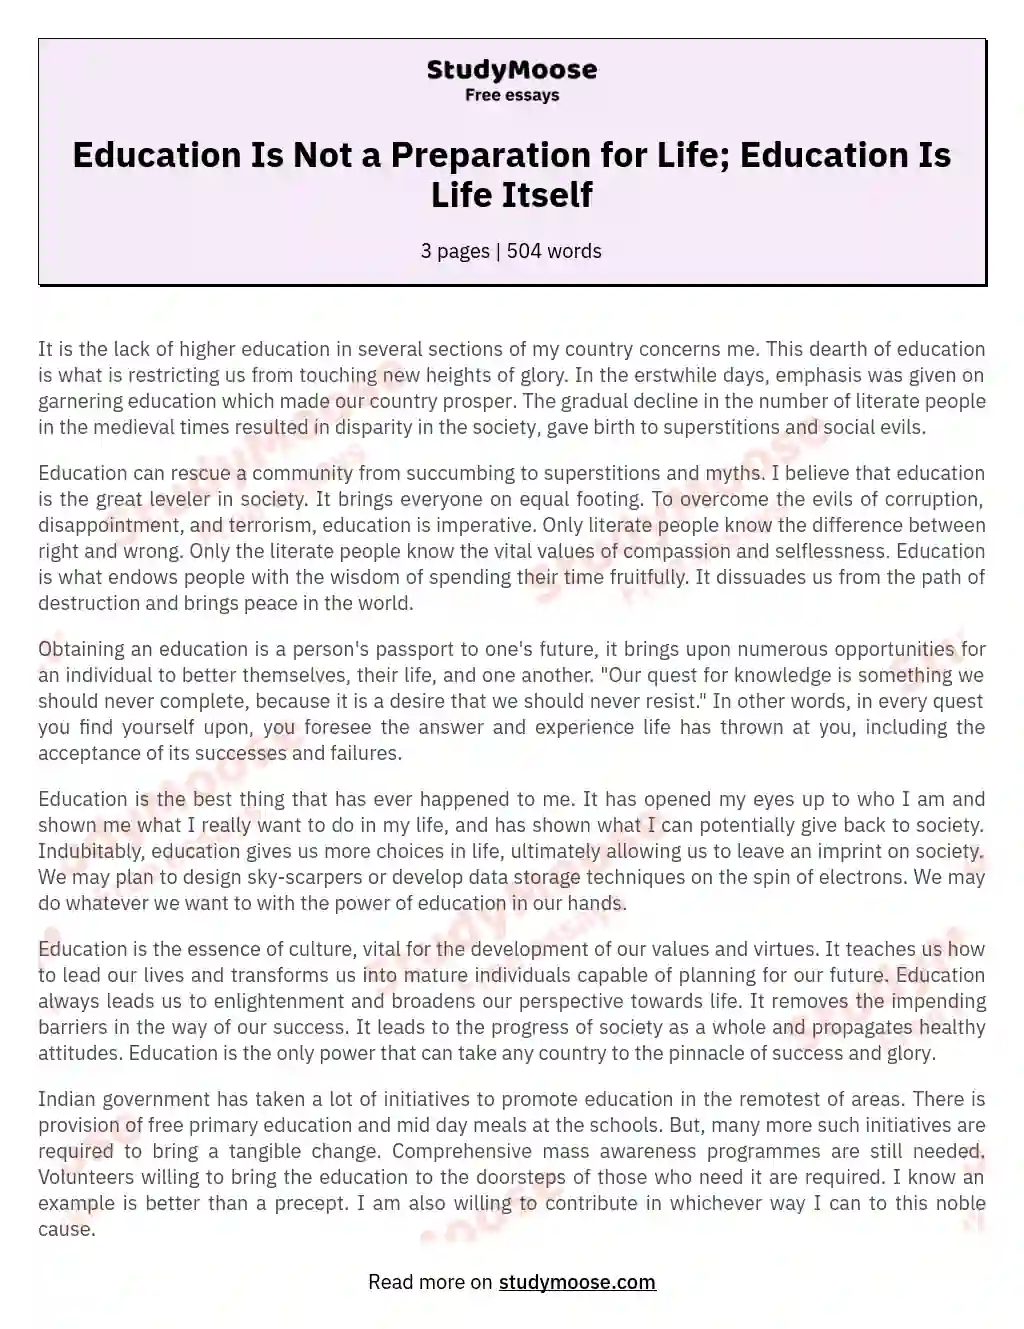 Education Is Not a Preparation for Life; Education Is Life Itself essay